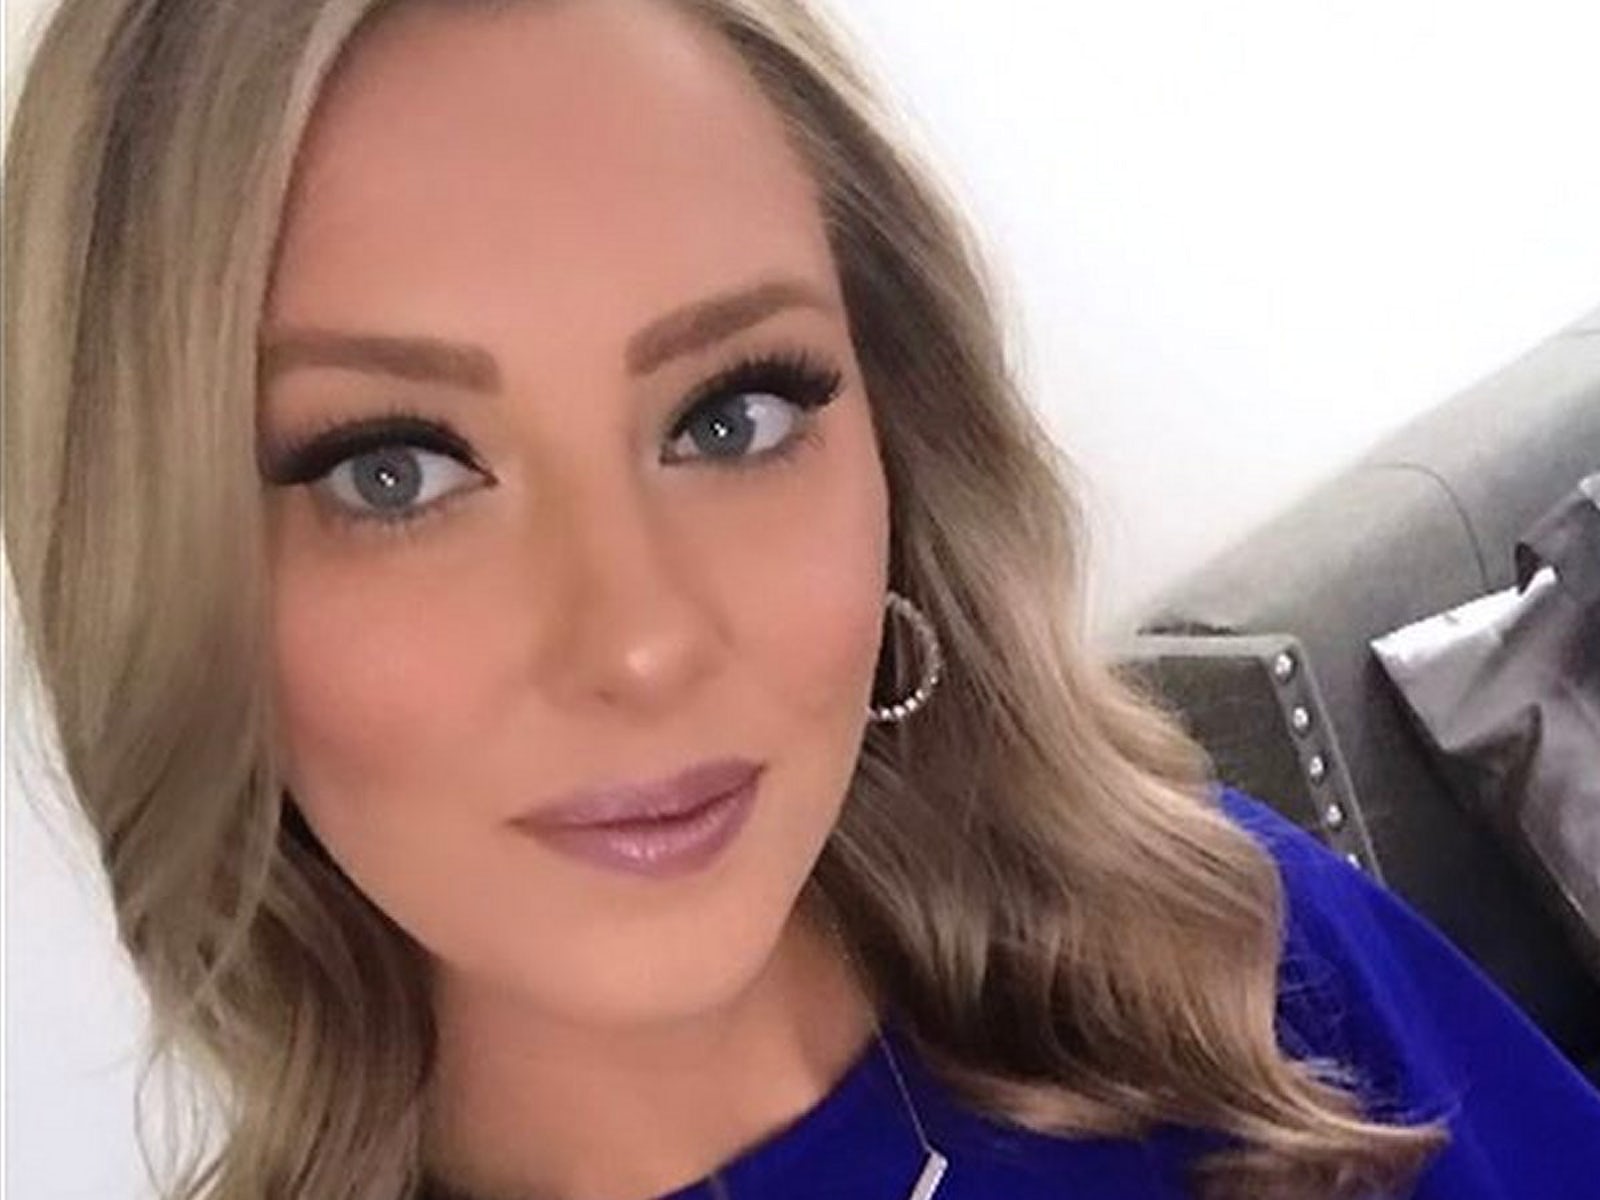 Married at First Sight alum Molly Duff has posted a rare lengthy public pos...